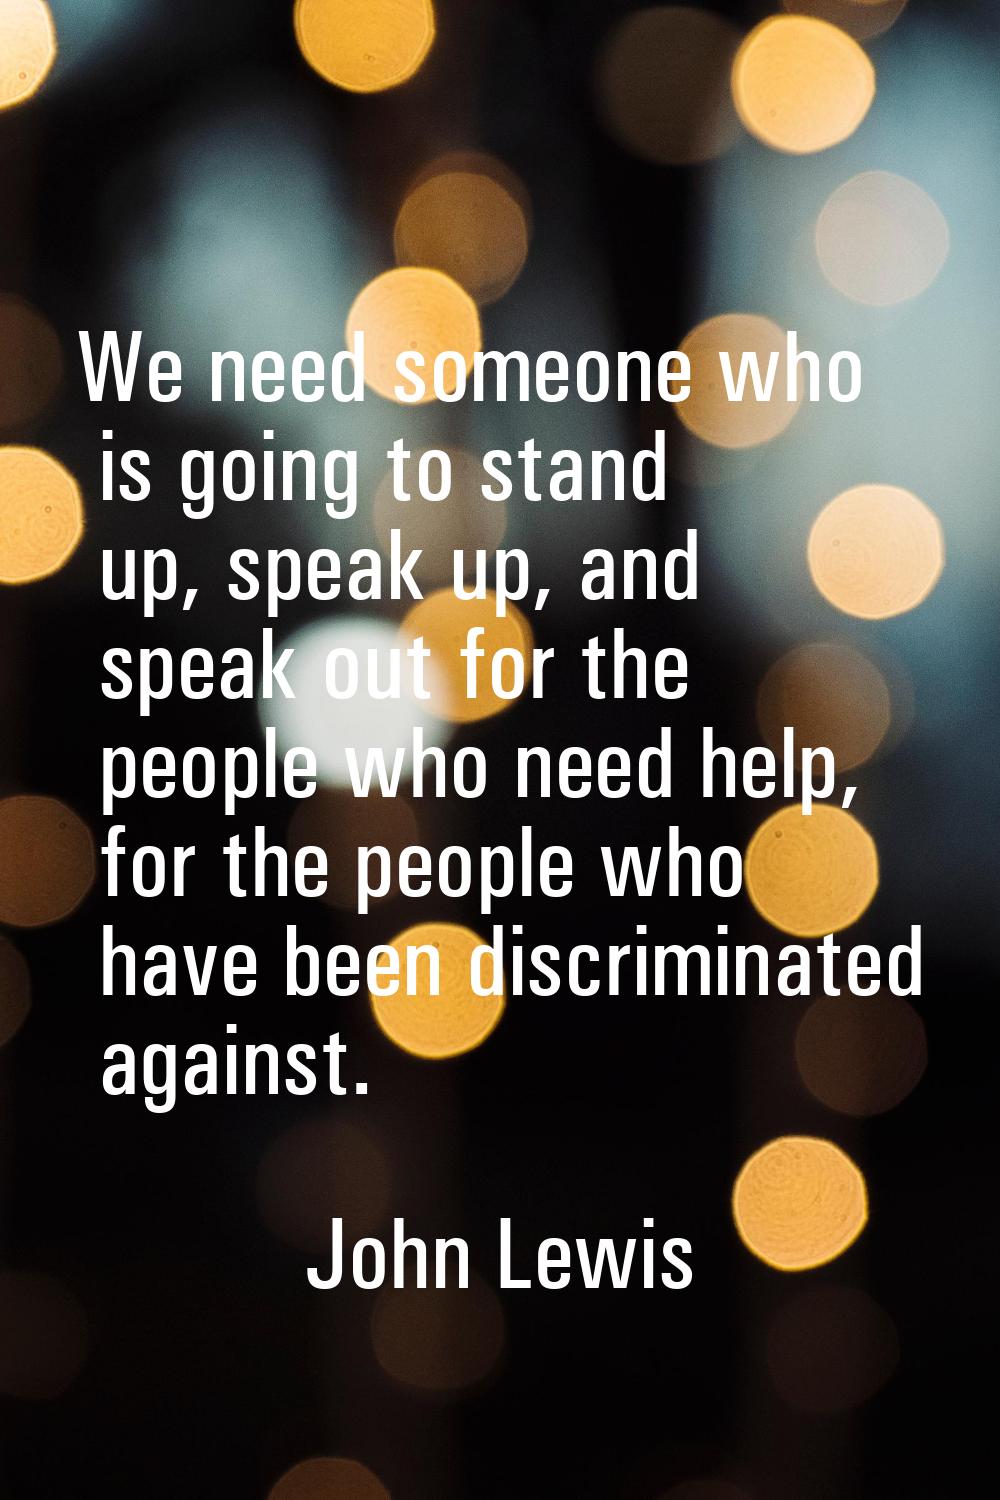 We need someone who is going to stand up, speak up, and speak out for the people who need help, for